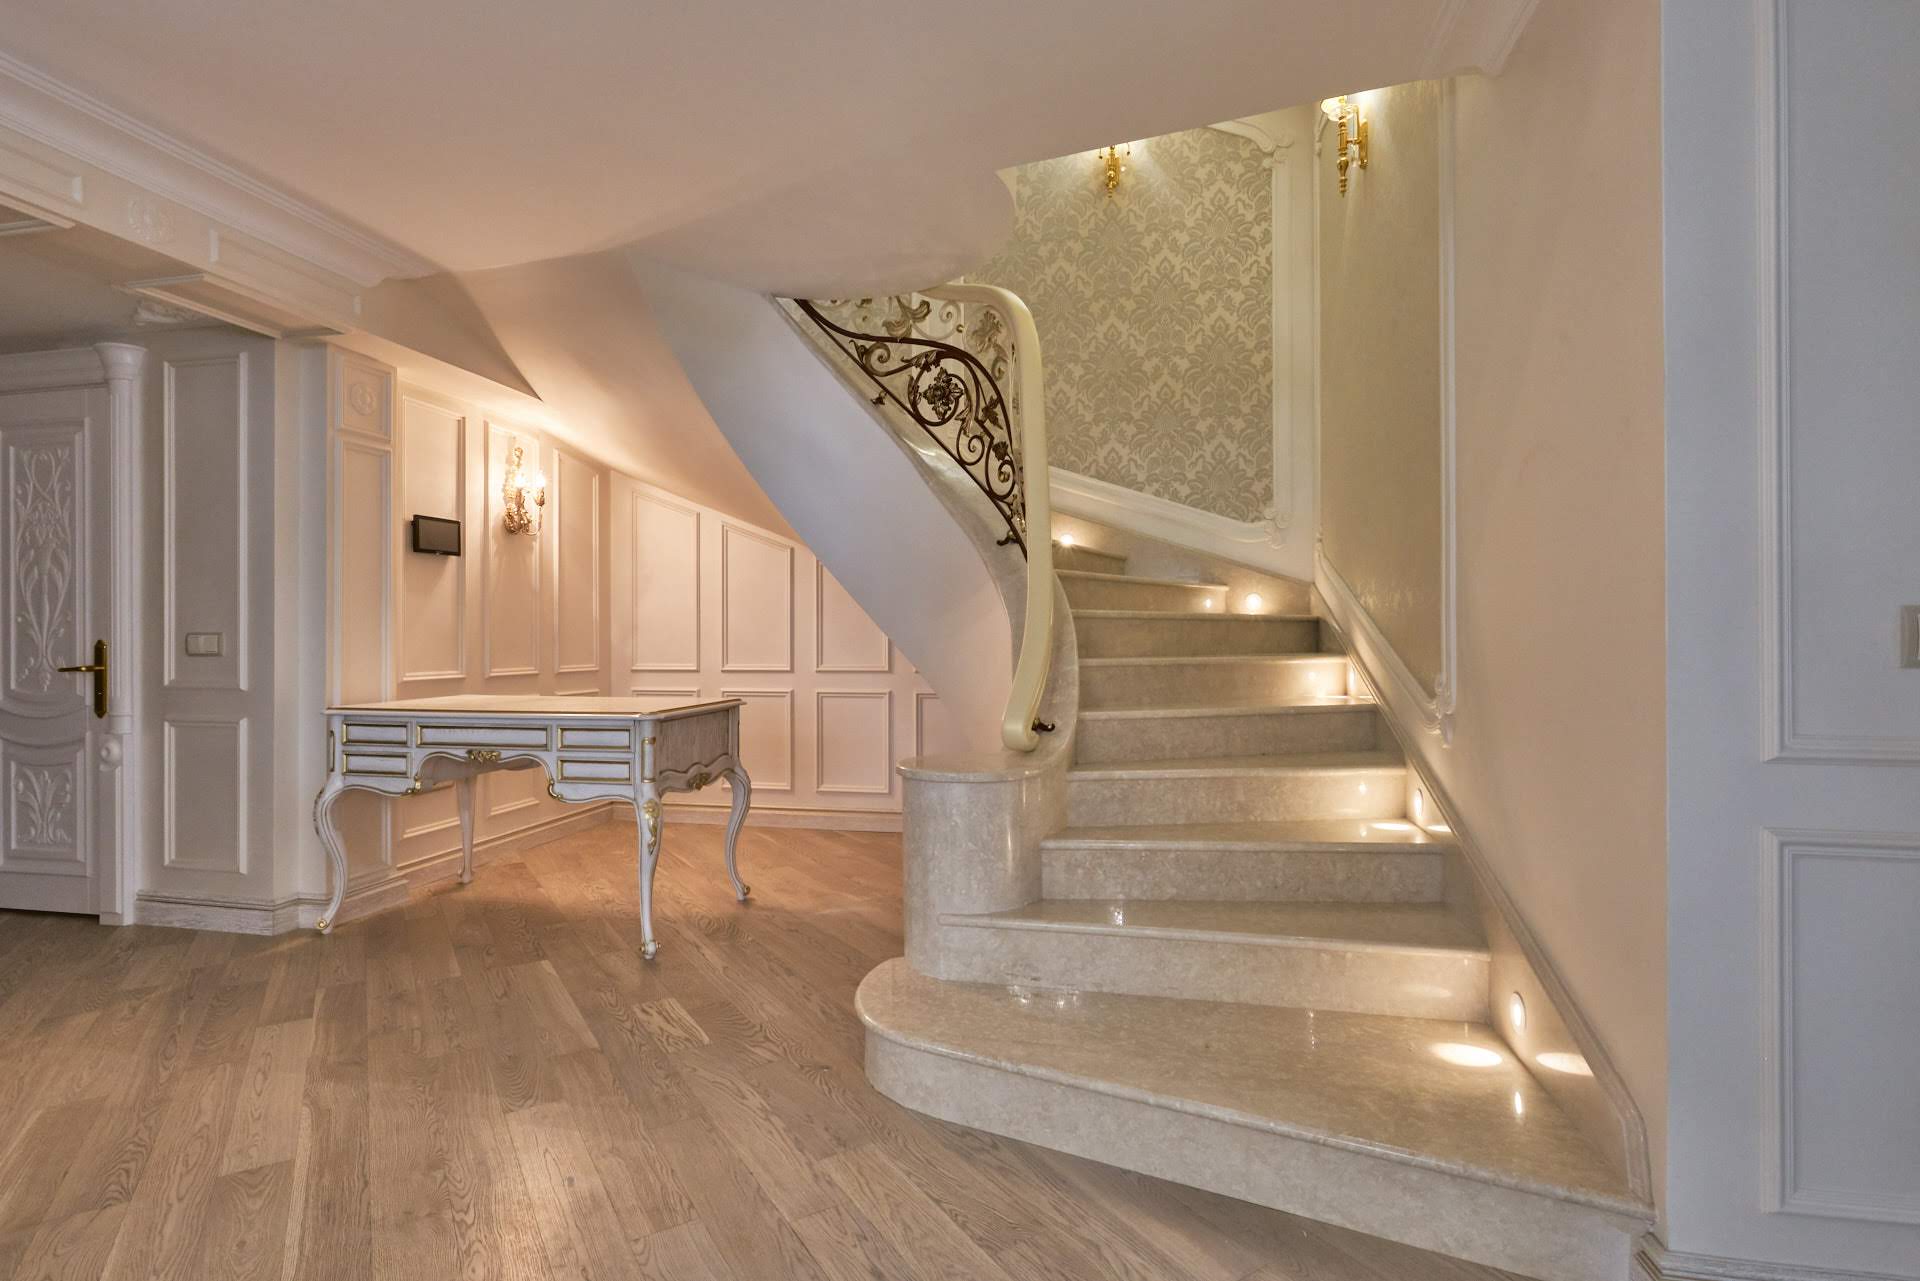 Stone, Staircase in a classic interior